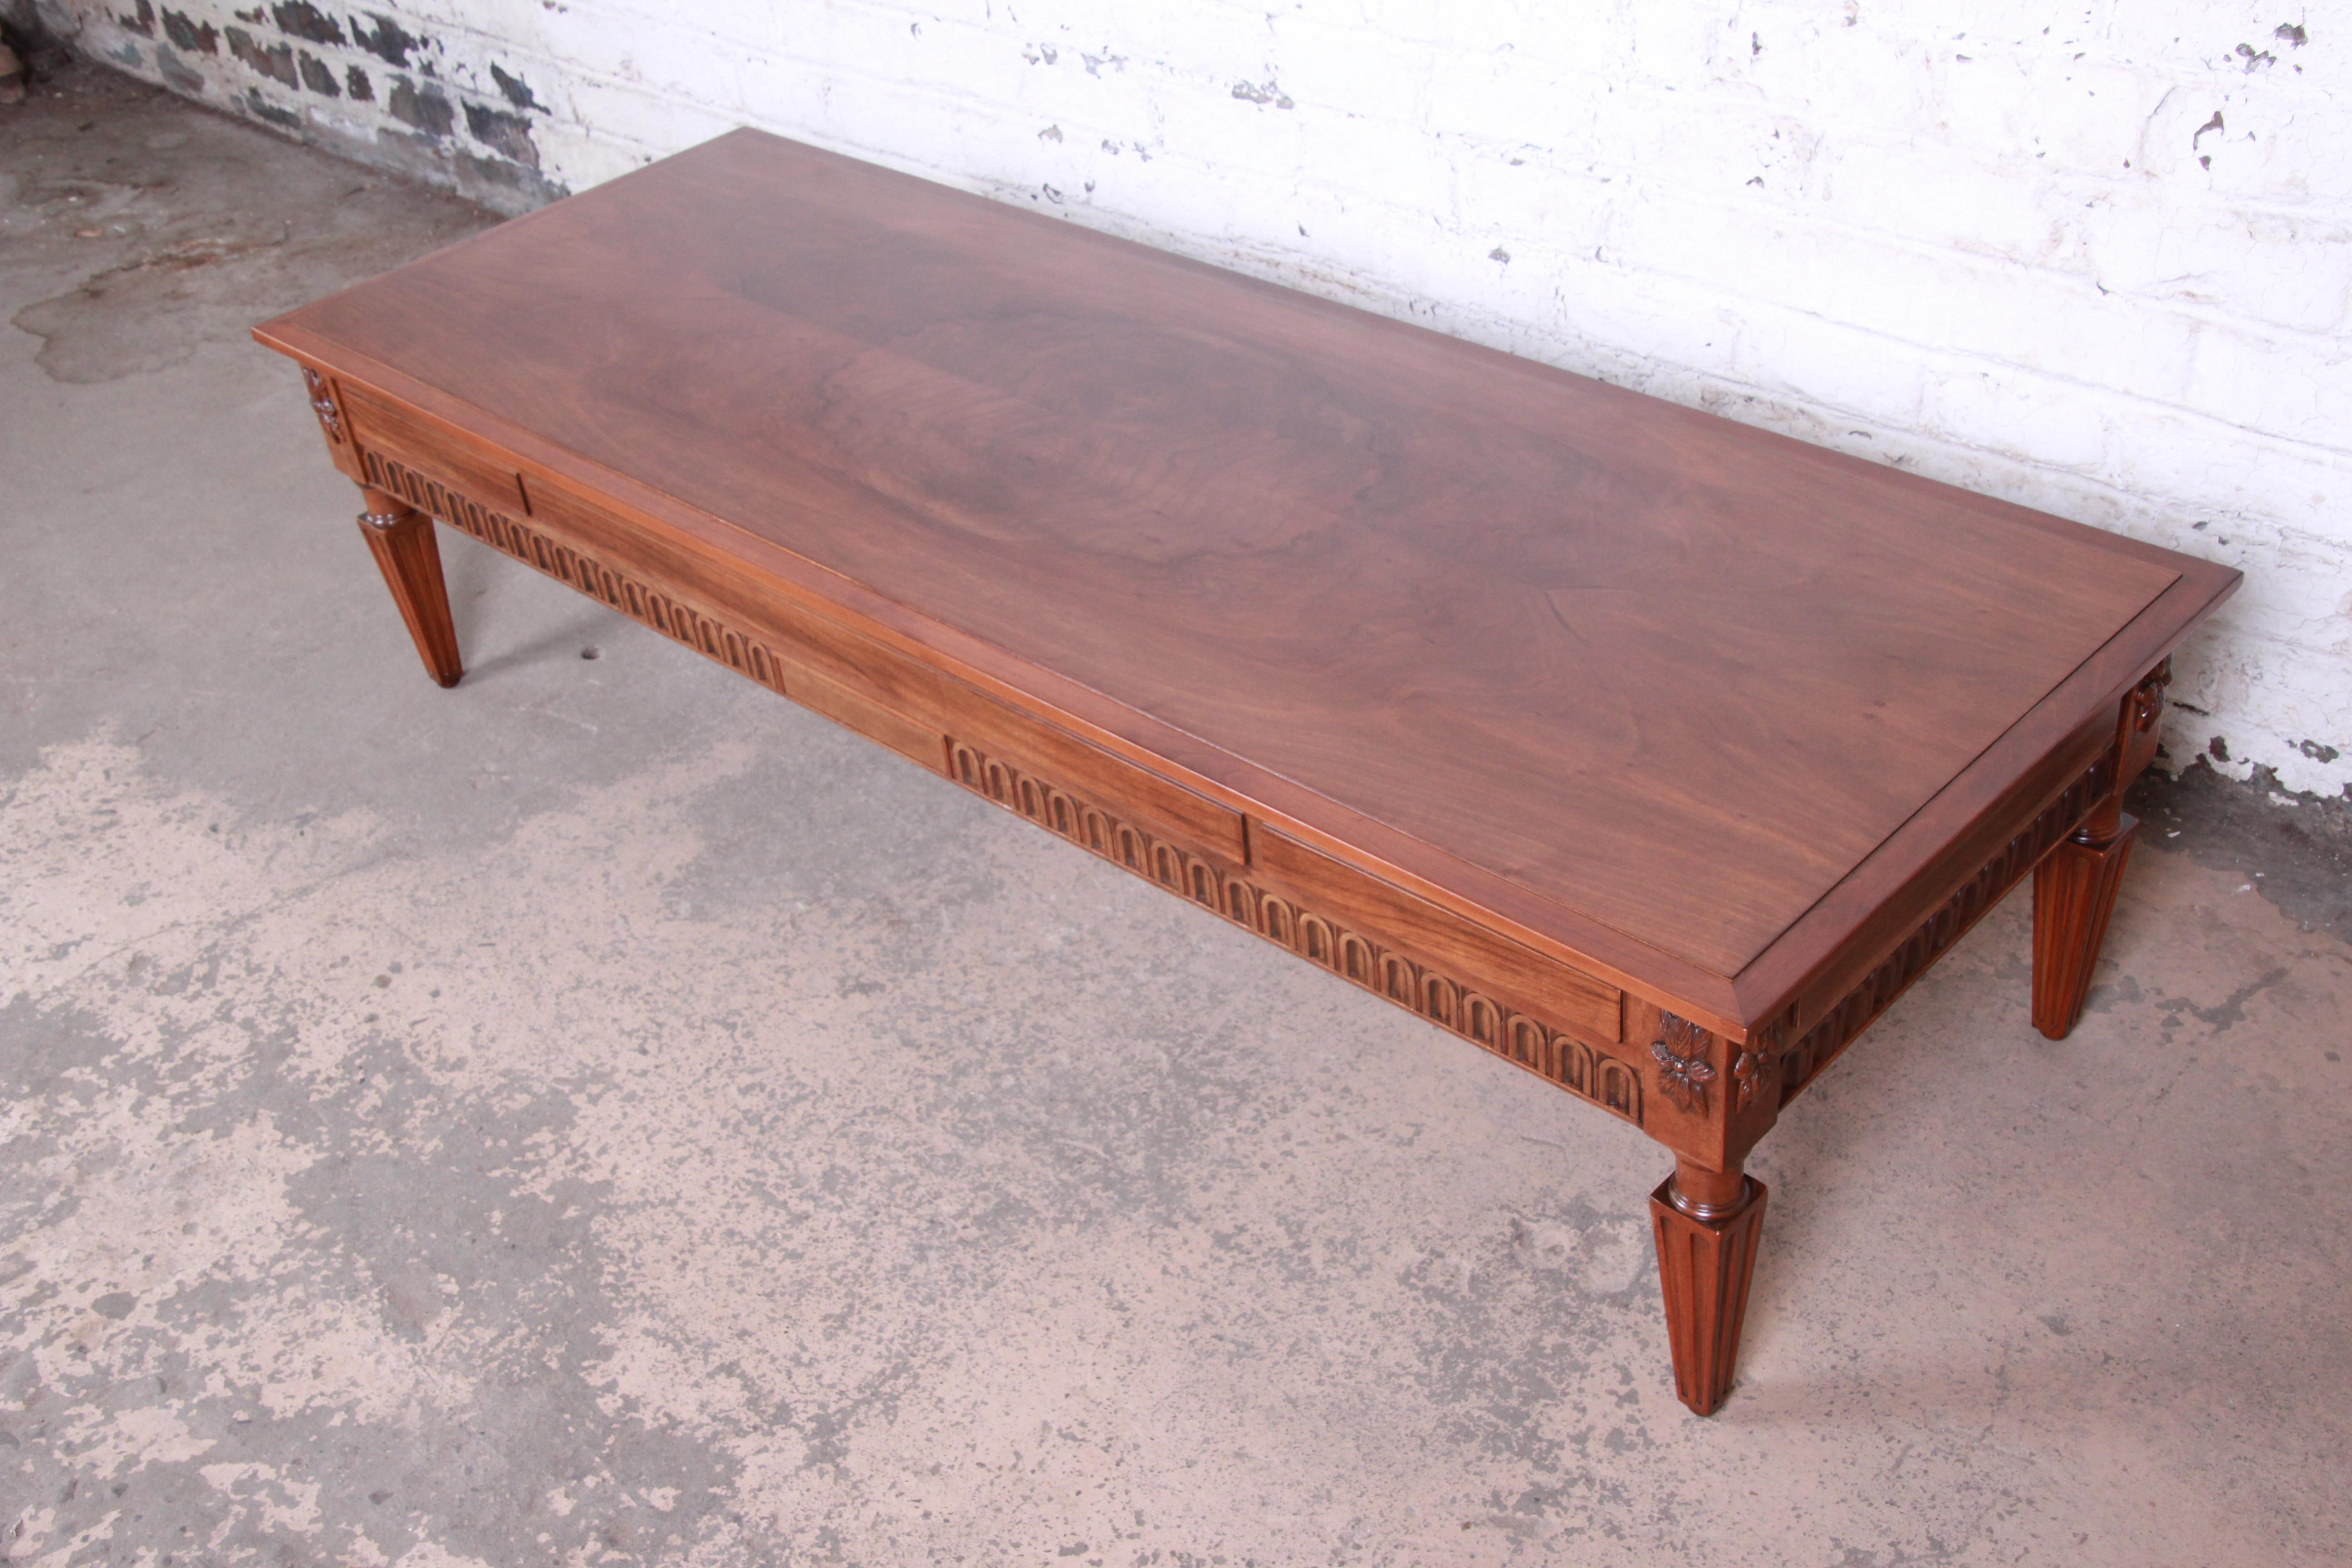 Louis XVI Baker Furniture French Regency Large Burled Walnut Coffee Table, Newly Restored